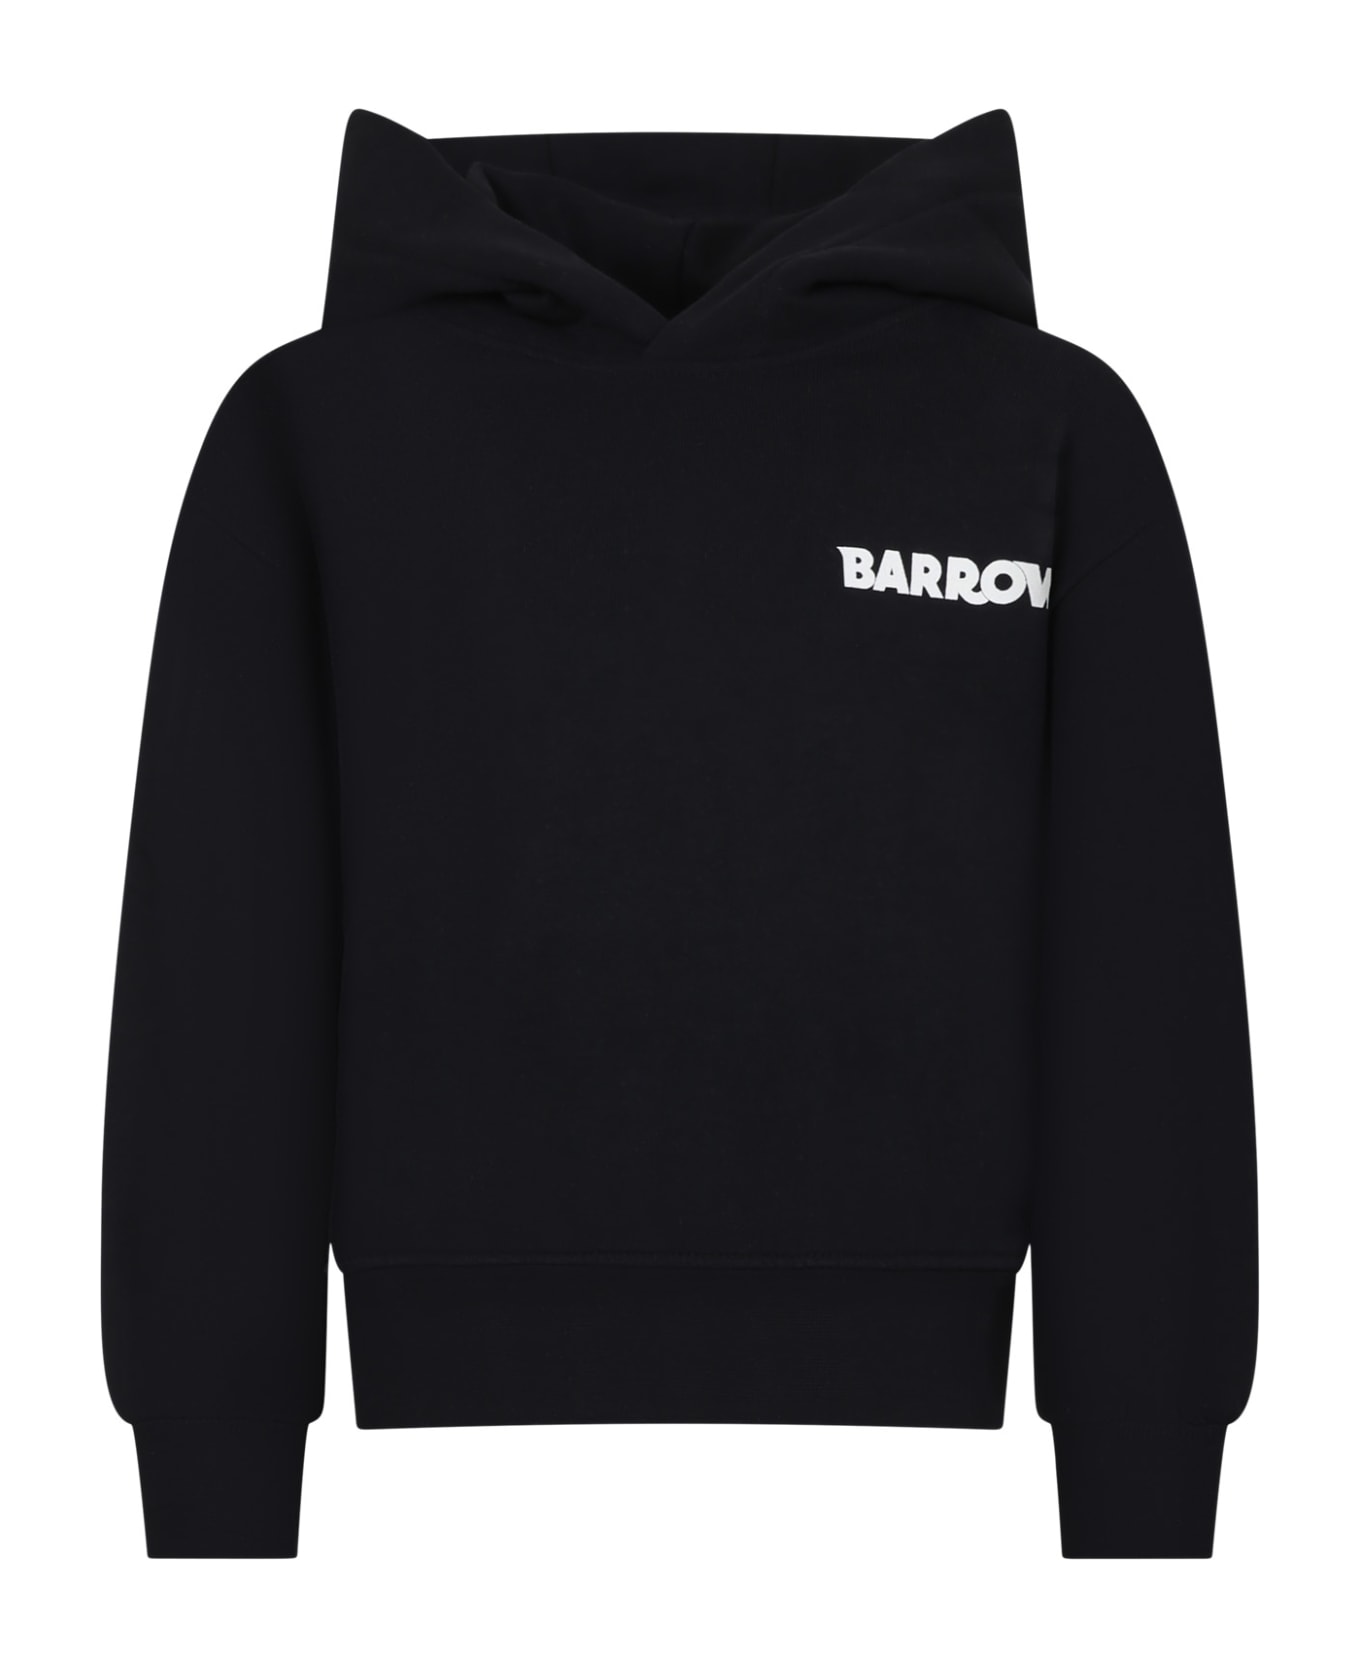 Barrow Black Sweatshirt For Kids With Logo And Iconic Smiley Face - Nero